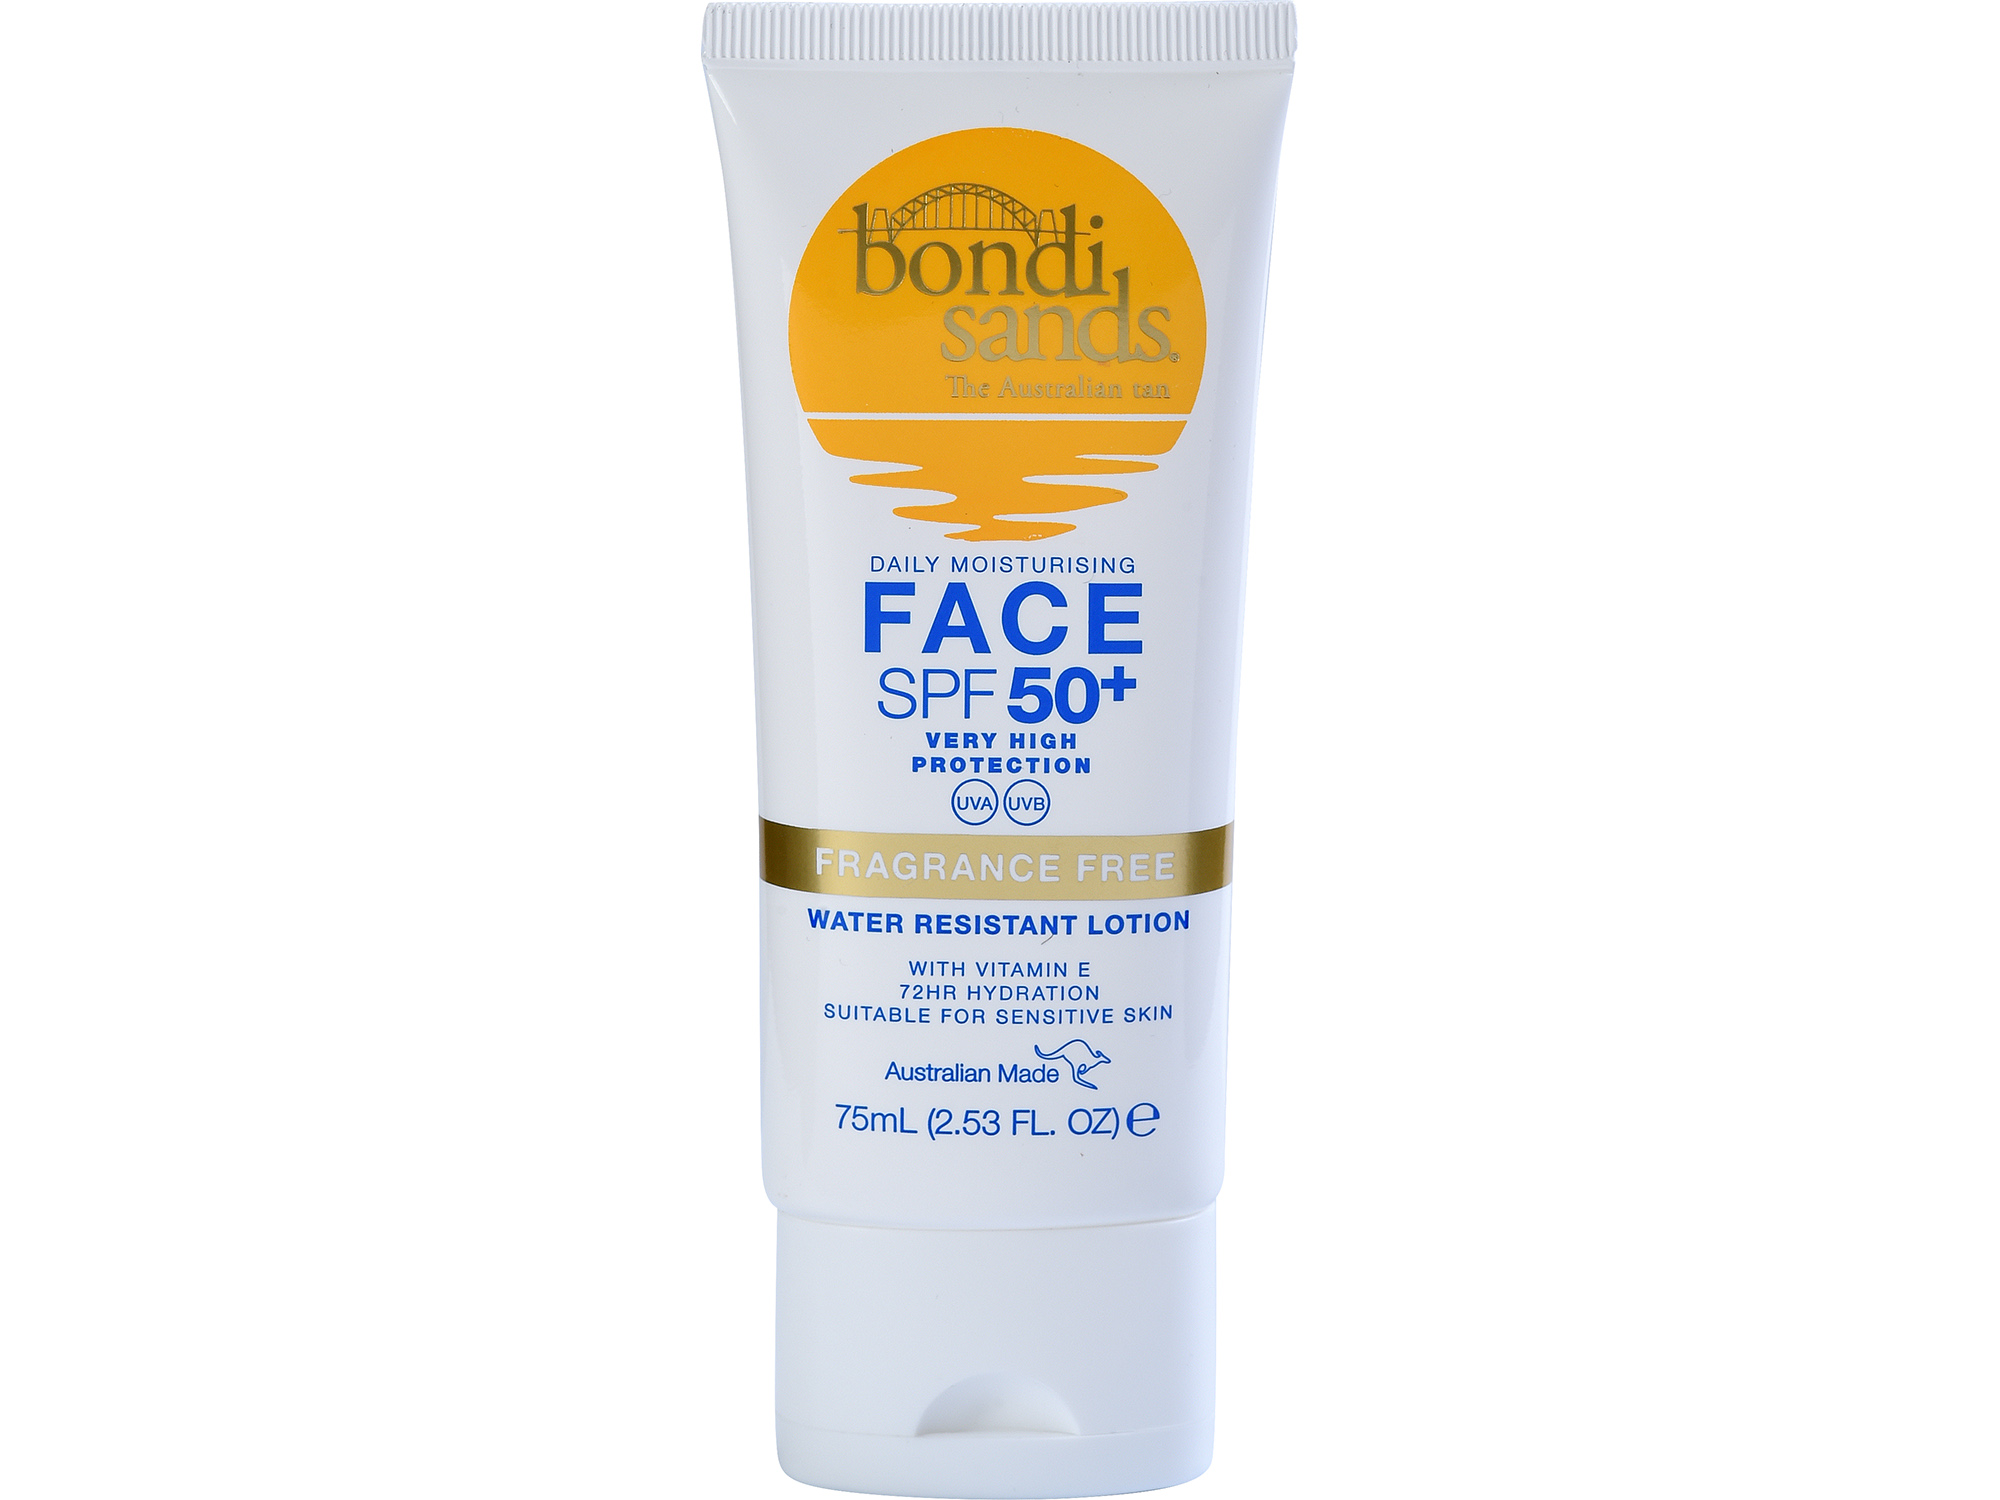 Bondi Sands SPF 50+ Fragrance Free Face Sunscreen Lotion. (Which?/PA)